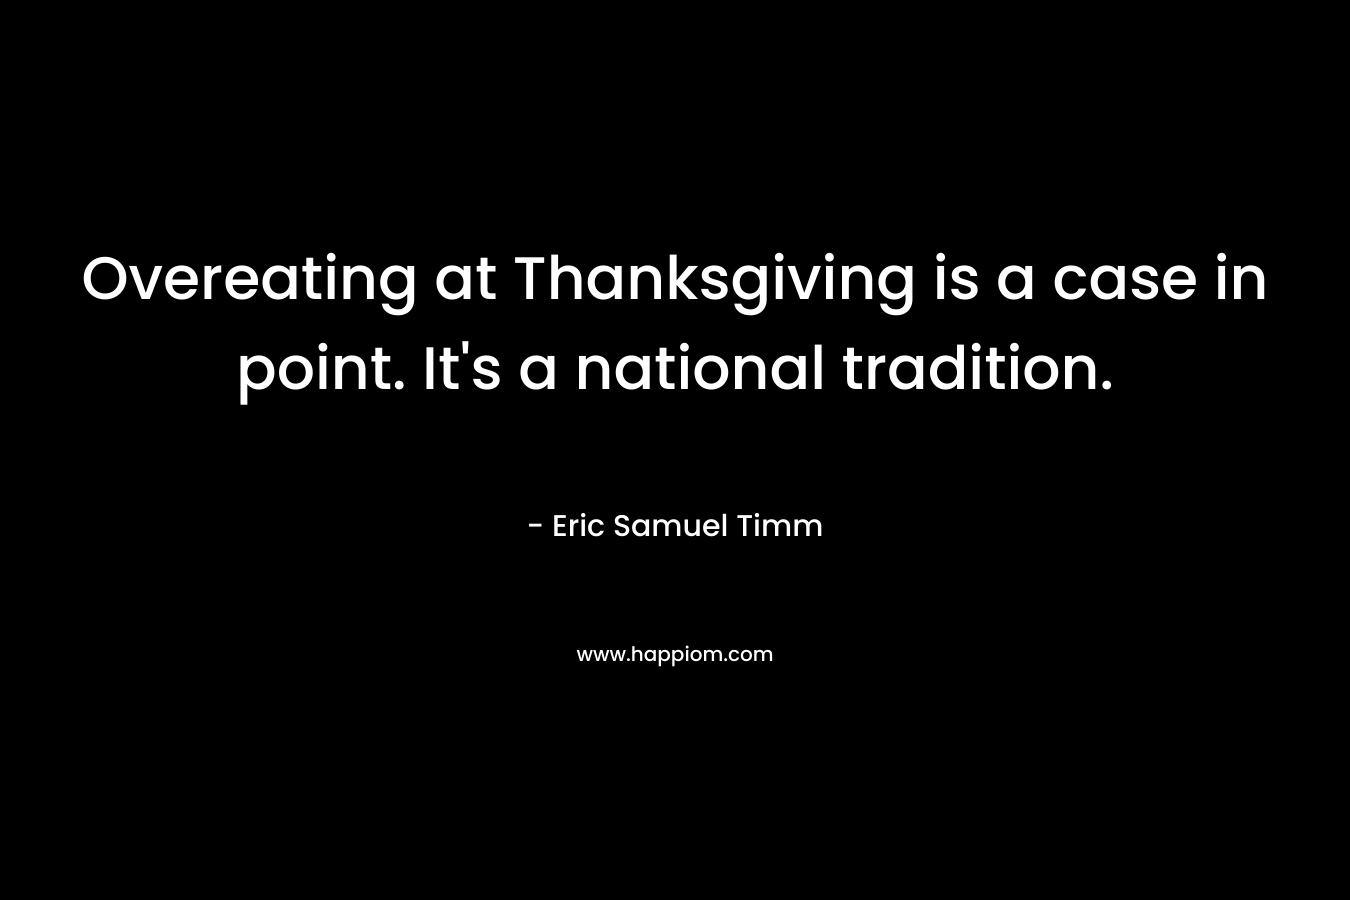 Overeating at Thanksgiving is a case in point. It's a national tradition.